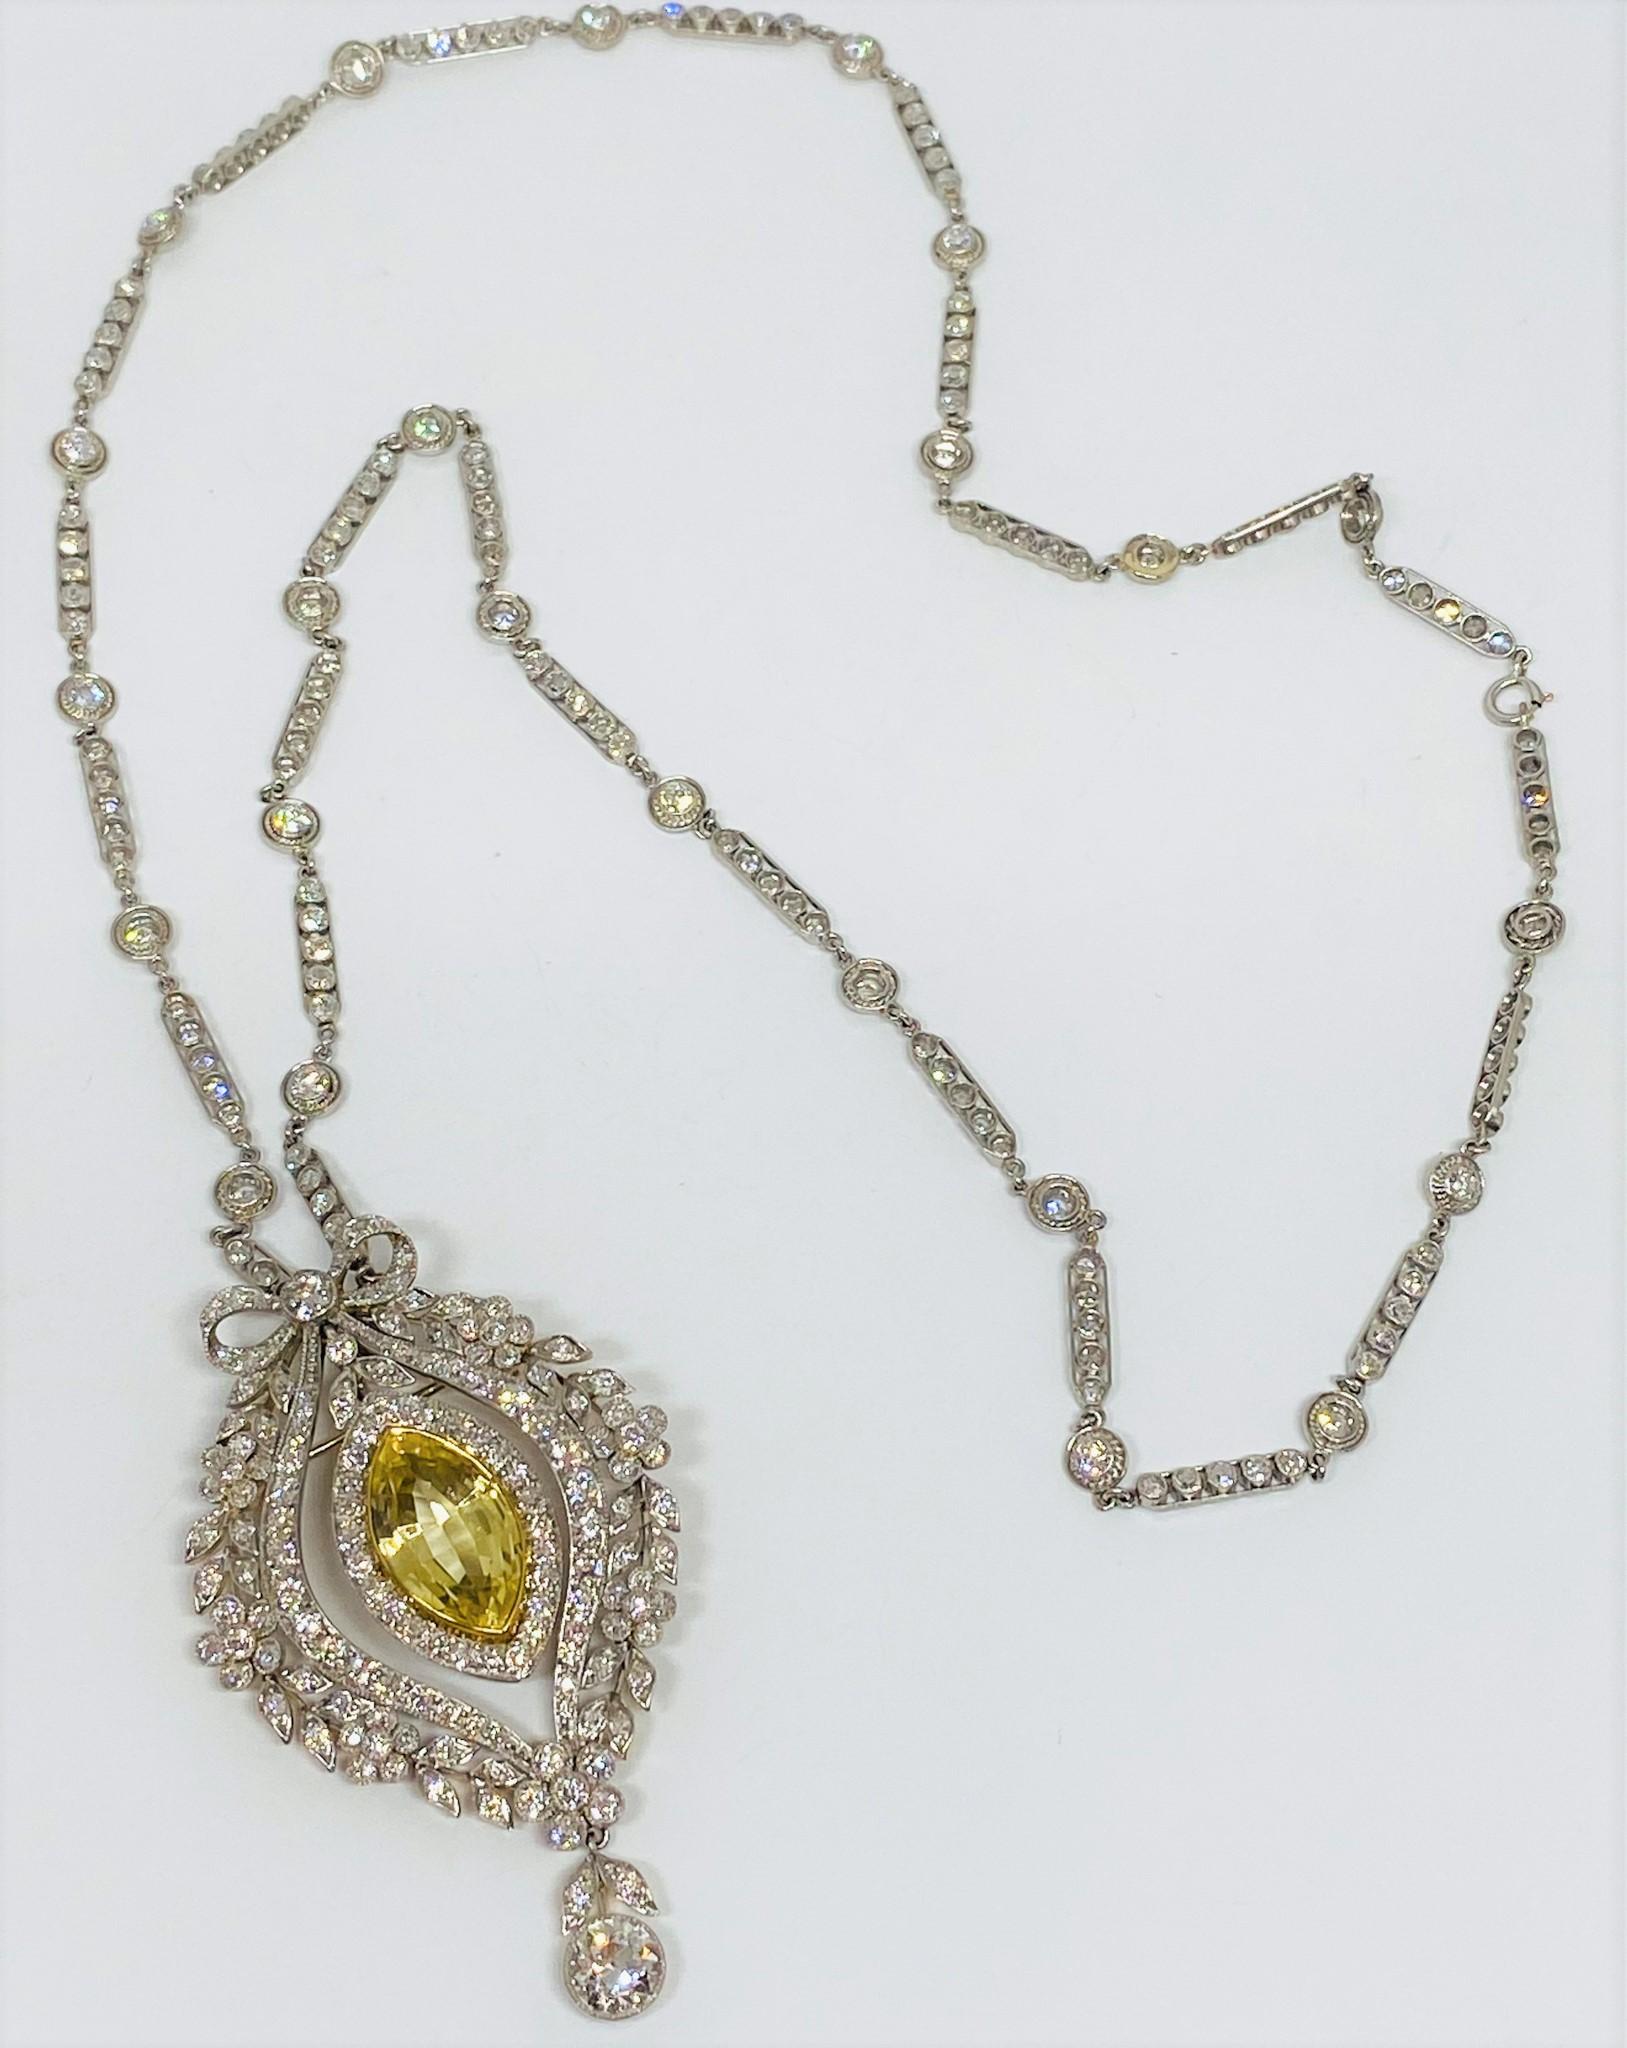 Incredible and rare estate necklace with a brooch pendant from the 1890's in platinum featuring a diamond bezel 22 inch chain in platinum with a beautiful ornate pendant, which can be removed and worn as a brooch with a C clasp closure, that holds a